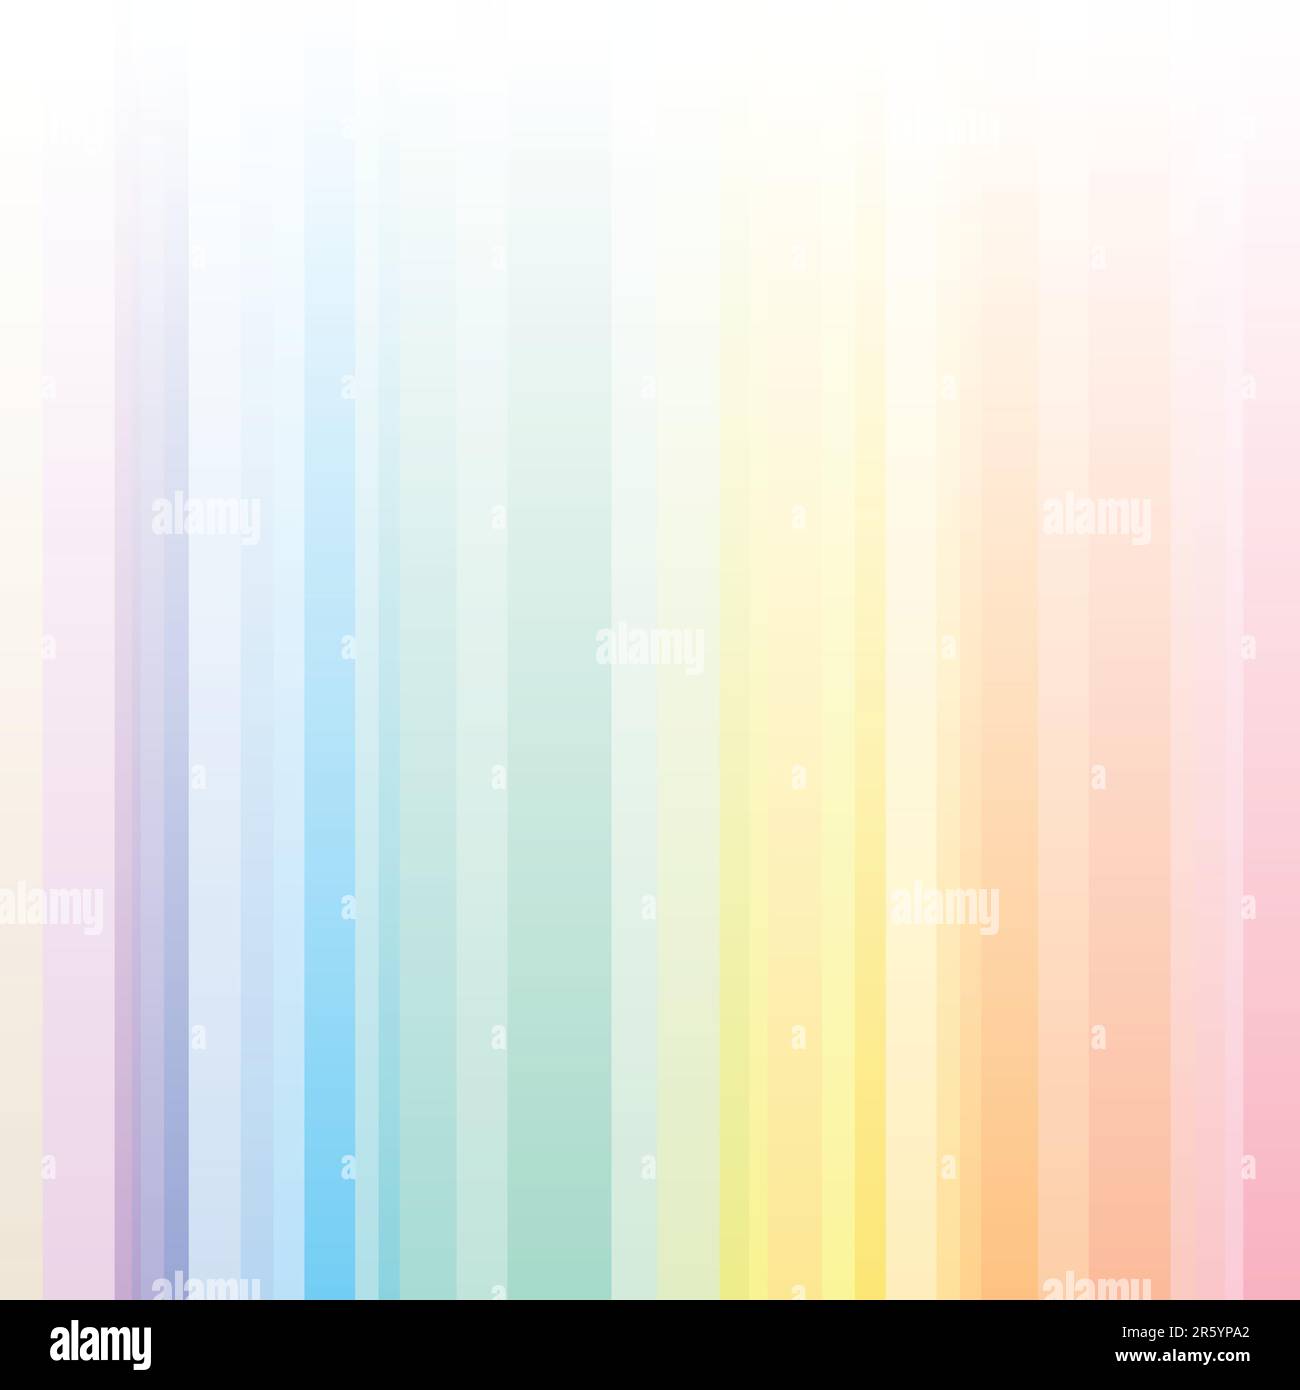 Seamless harmony stripes pattern with rainbow colors, ideal for a background. Stock Vector